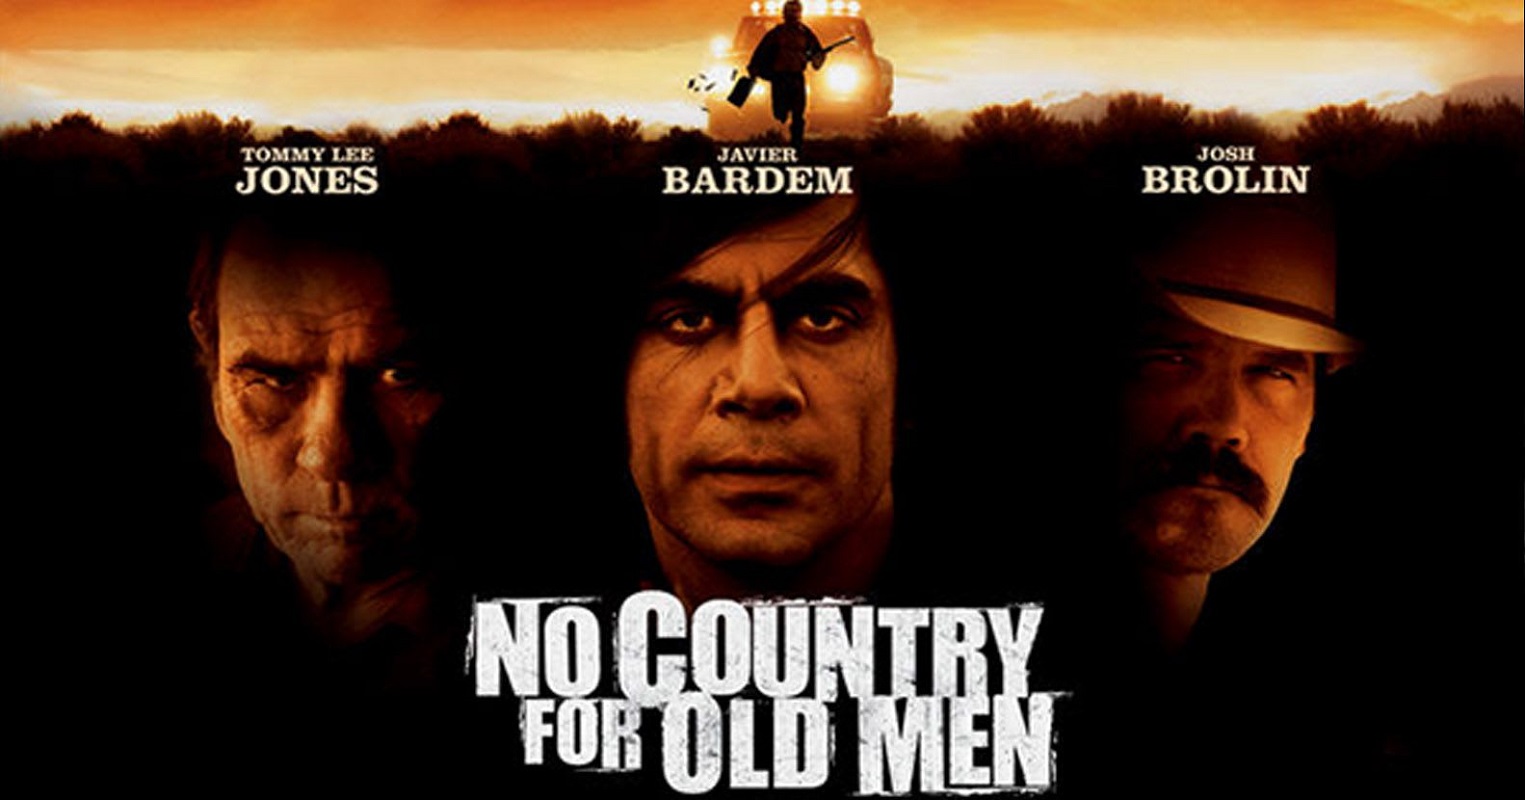 Име:  no country for old men.jpg
Разглеждания: 97
Размер:  169,6 КБ